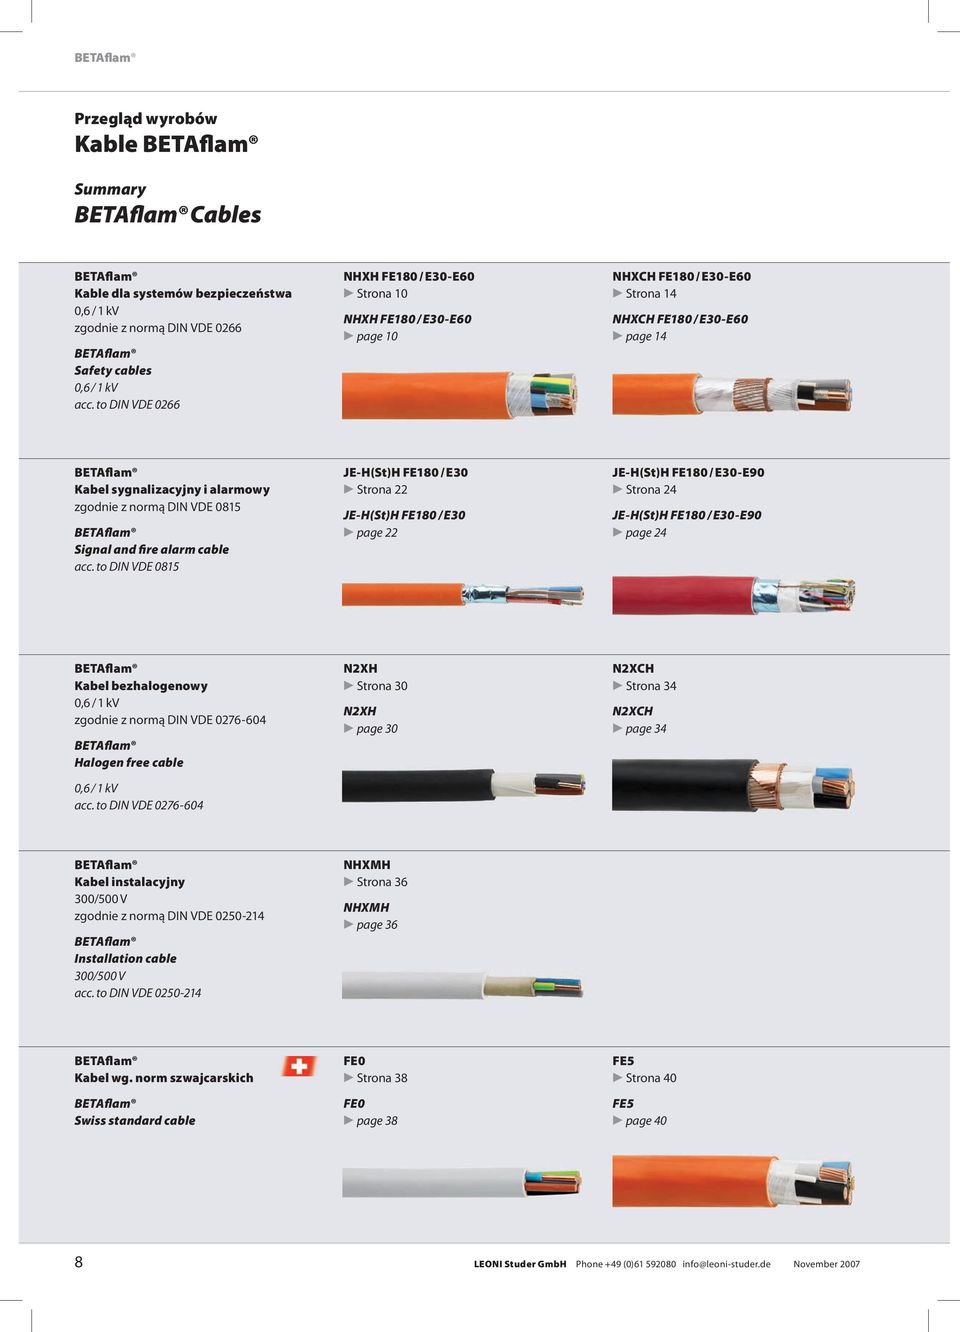 VDE 0815 BETAflam Signal and fire alarm cable acc.